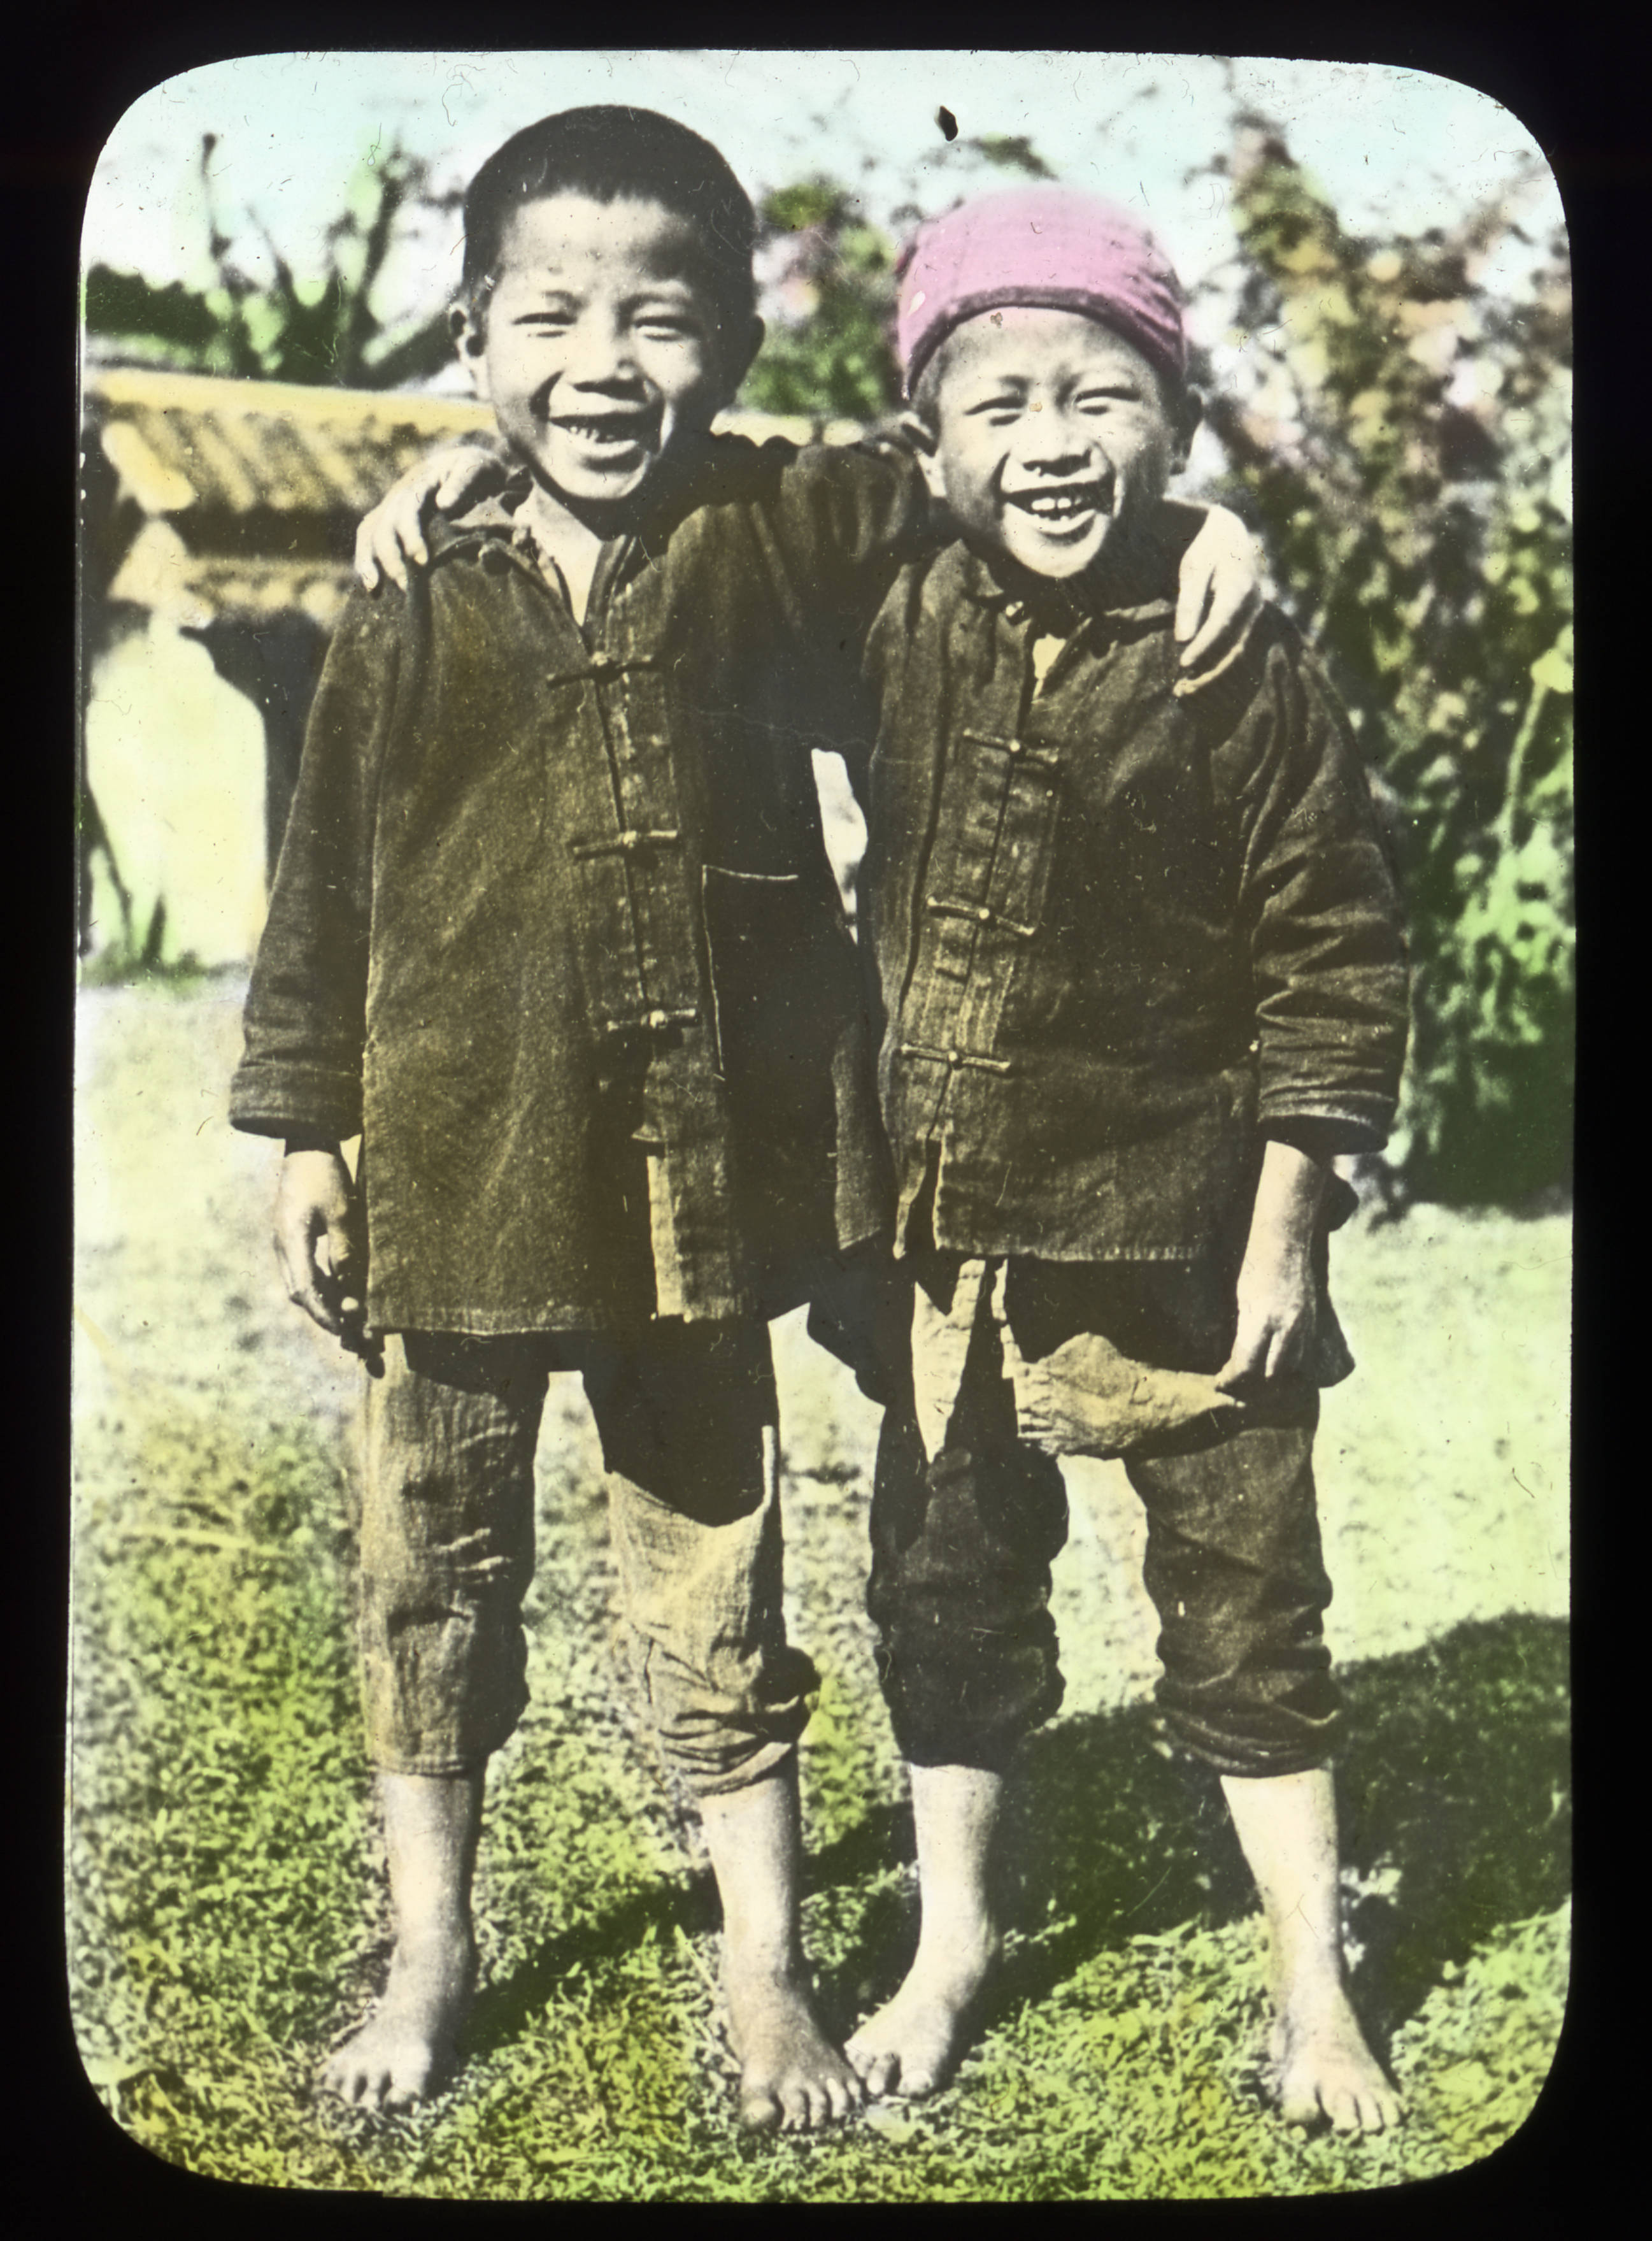 Two smiling boys with their arms over each other's shoulders, China, ca. 1918-1938 (MFB-LS0254)